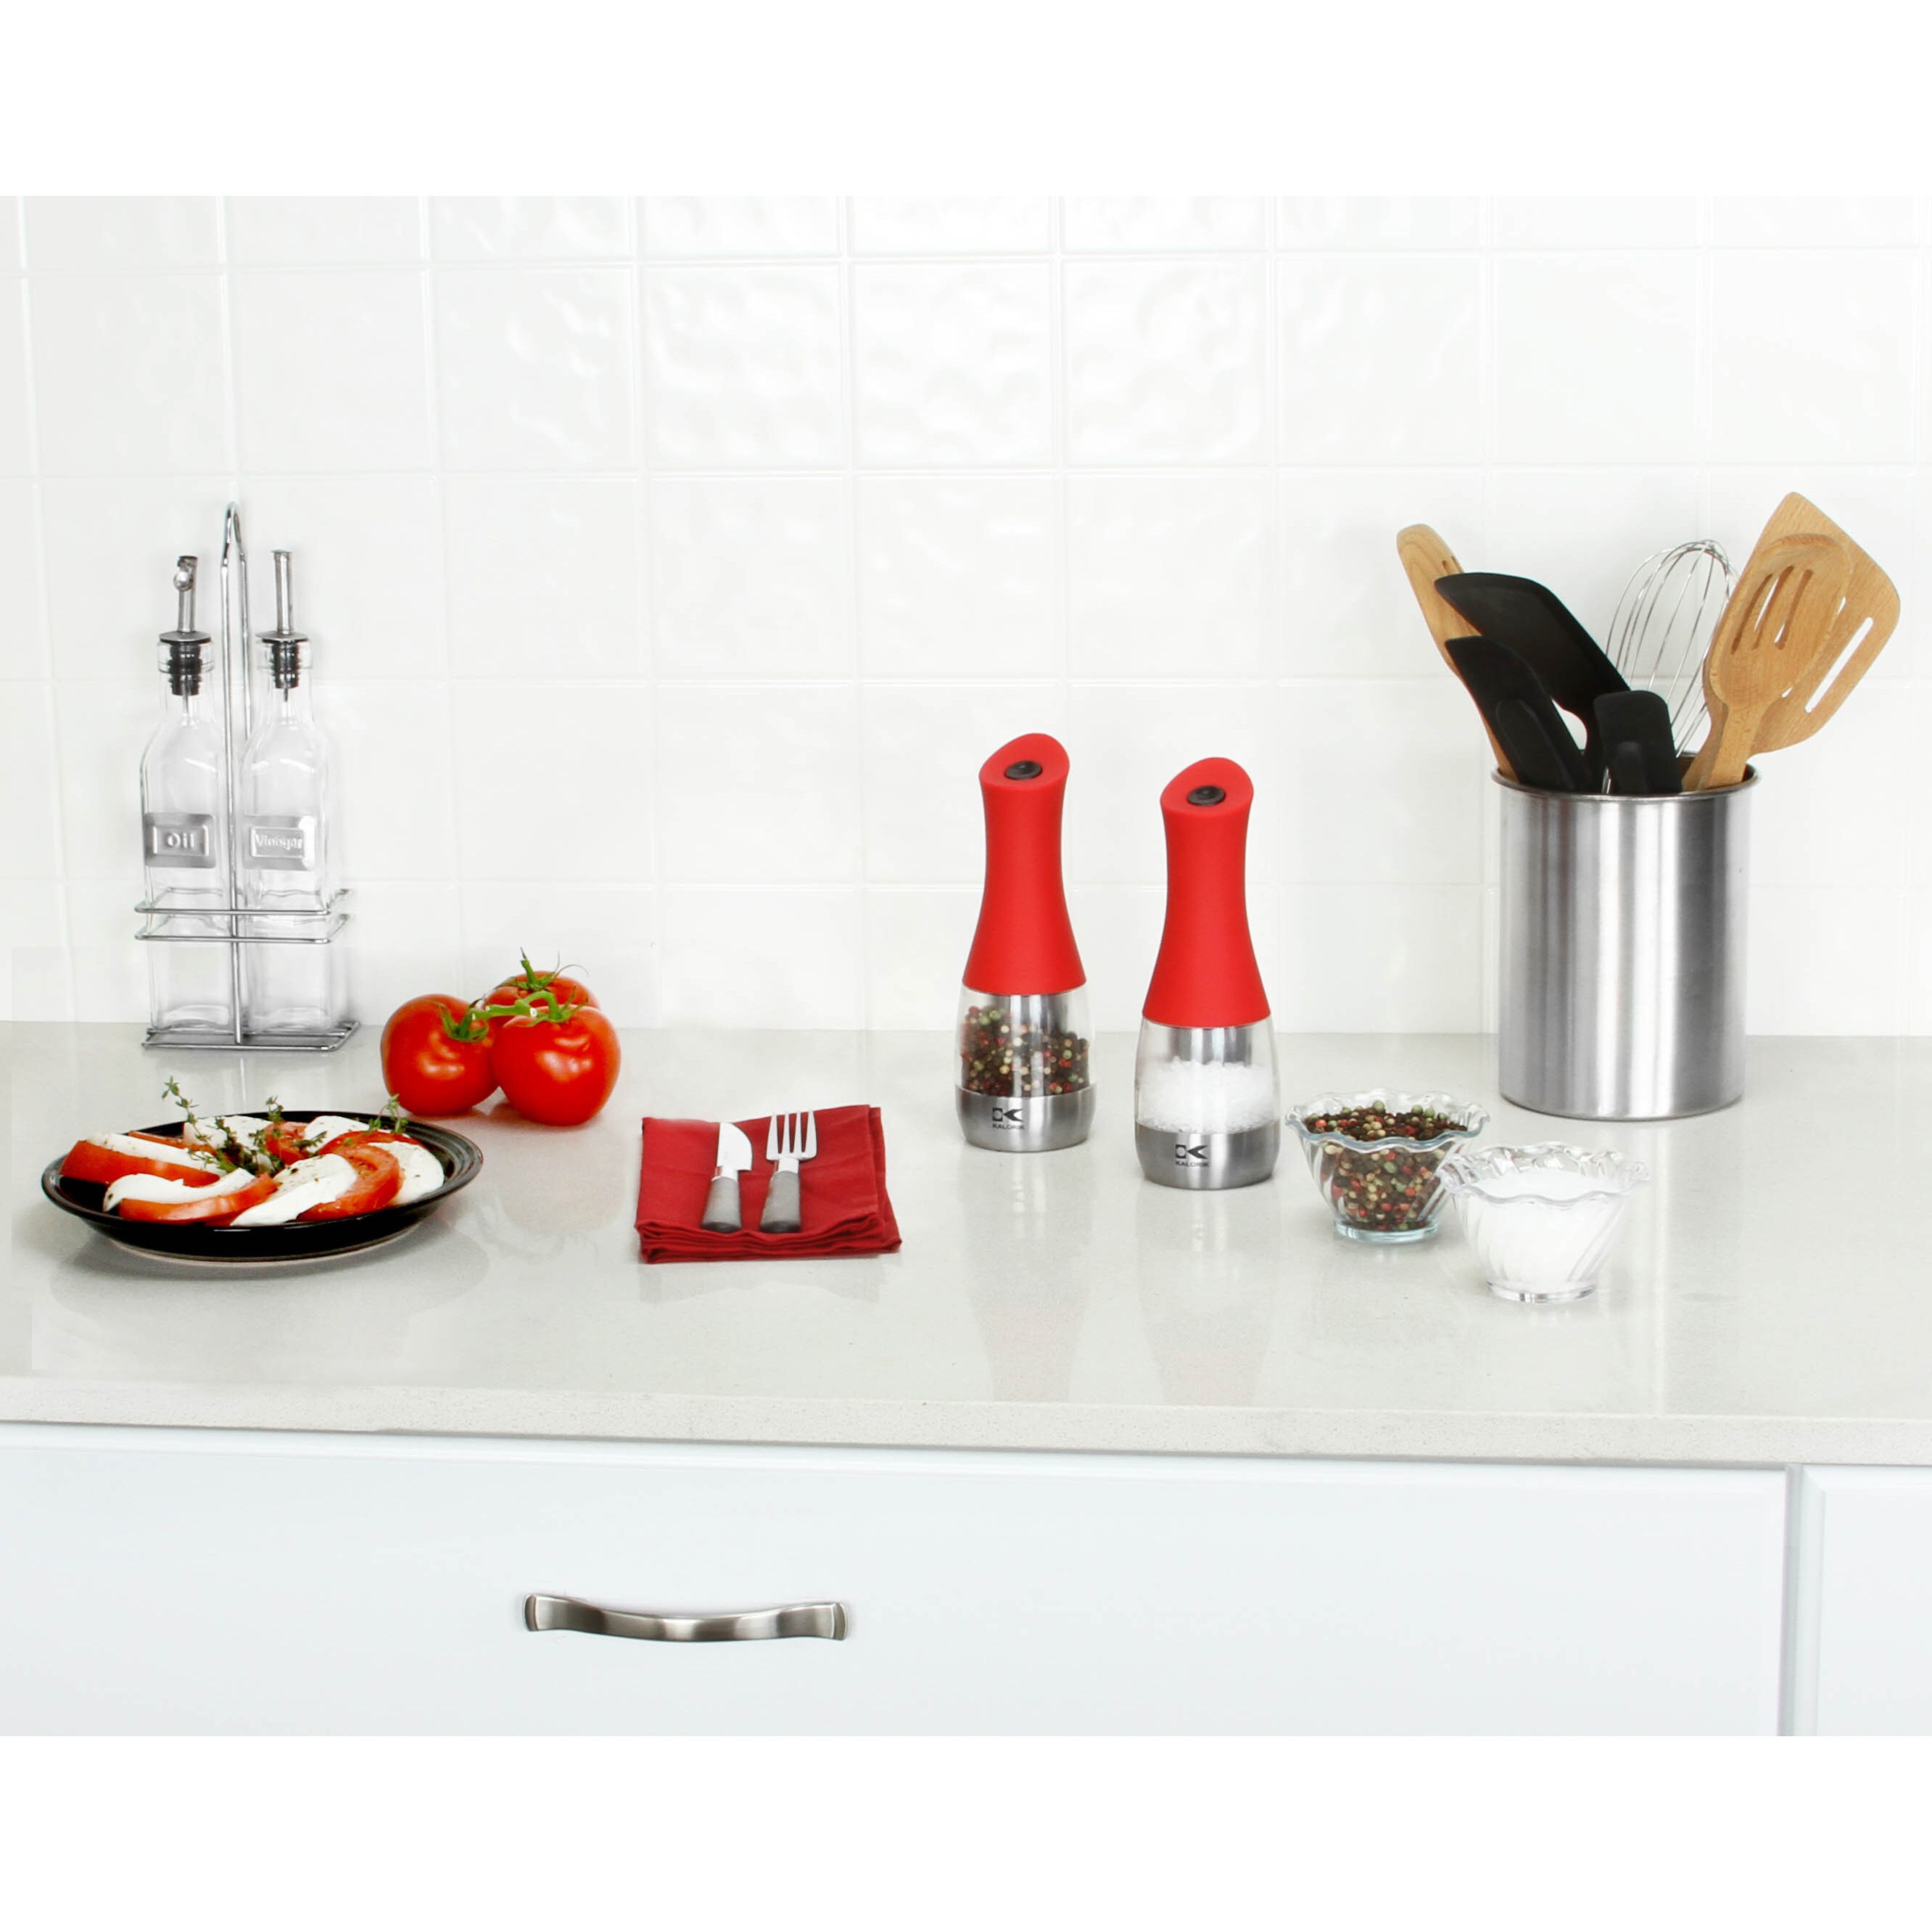 https://ak1.ostkcdn.com/images/products/13286607/Kalorik-Contempo-Stainless-Steel-and-Red-Electric-Salt-and-Pepper-Grinder-Set-cc312103-fe45-452d-874f-87f5bc566b66.jpg